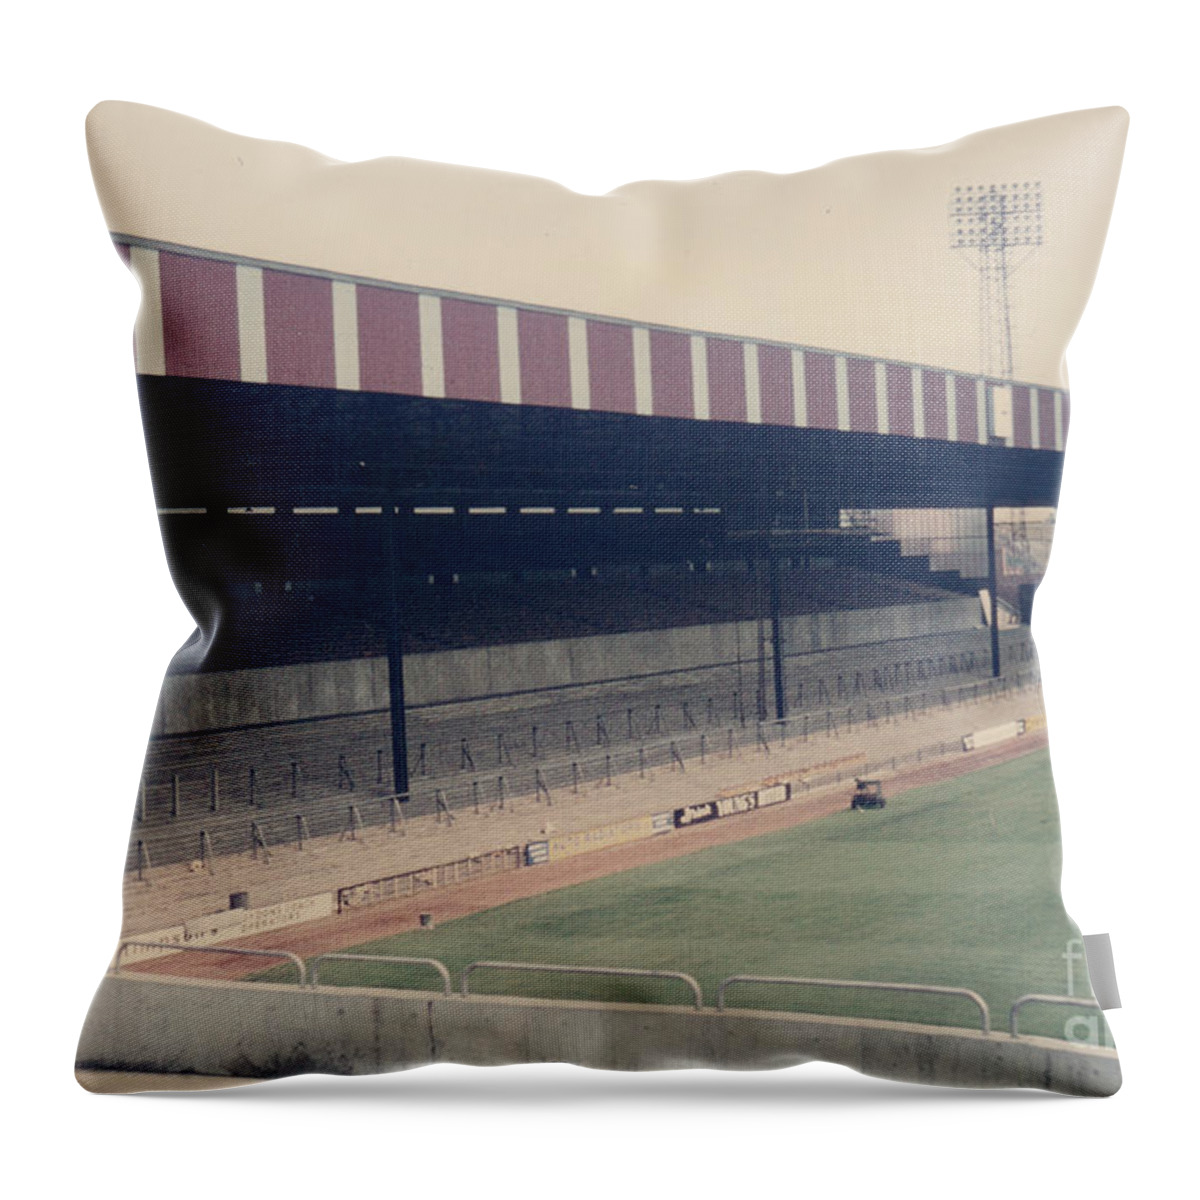 Crystal Palace Throw Pillow featuring the photograph Crystal Palace - Selhurst Park - East Stand Arthur Wait 1 - 1980s by Legendary Football Grounds